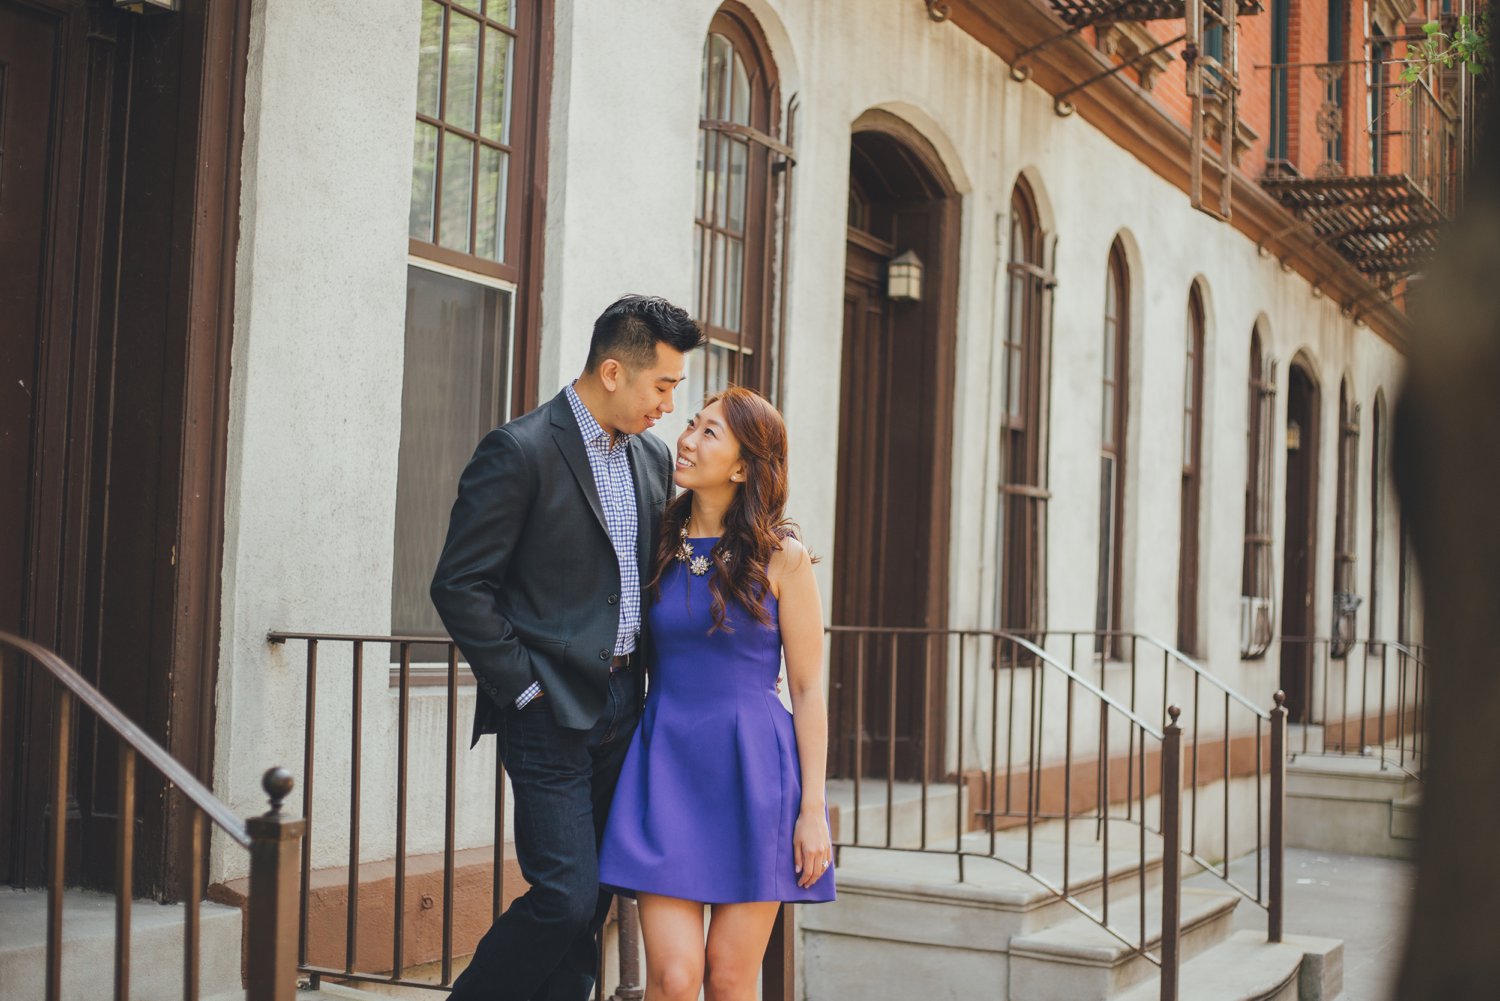 9NYC-NJ-ENGAGEMENT-PHOTOGRAPHY-BY-INTOTHESTORY-MOO-JAE.JPG